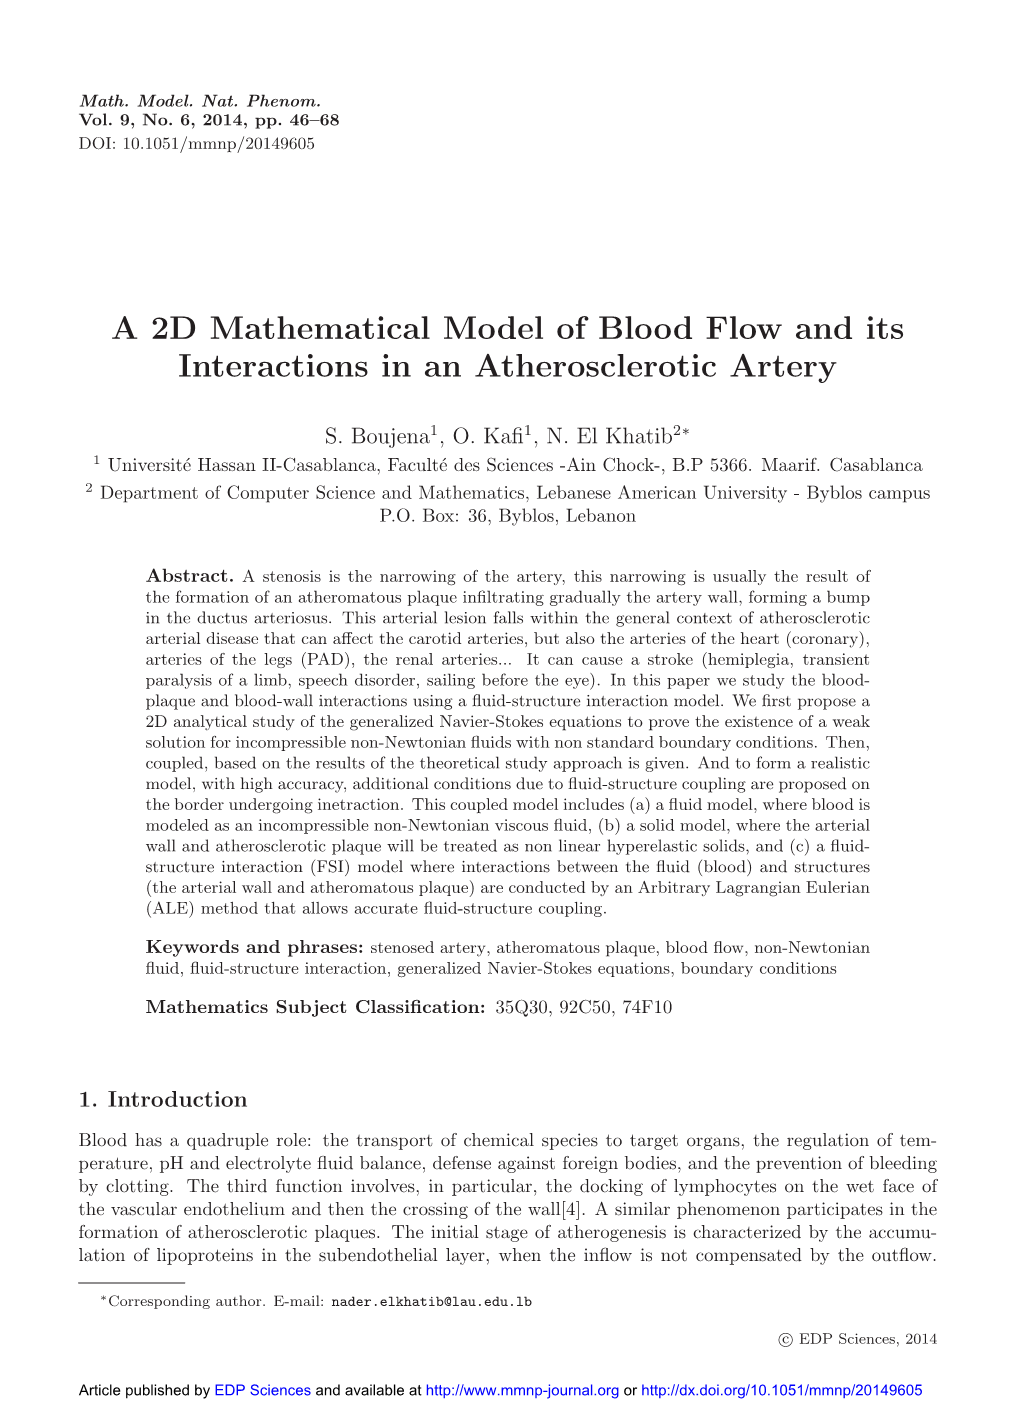 A 2D Mathematical Model of Blood Flow and Its Interactions in an Atherosclerotic Artery